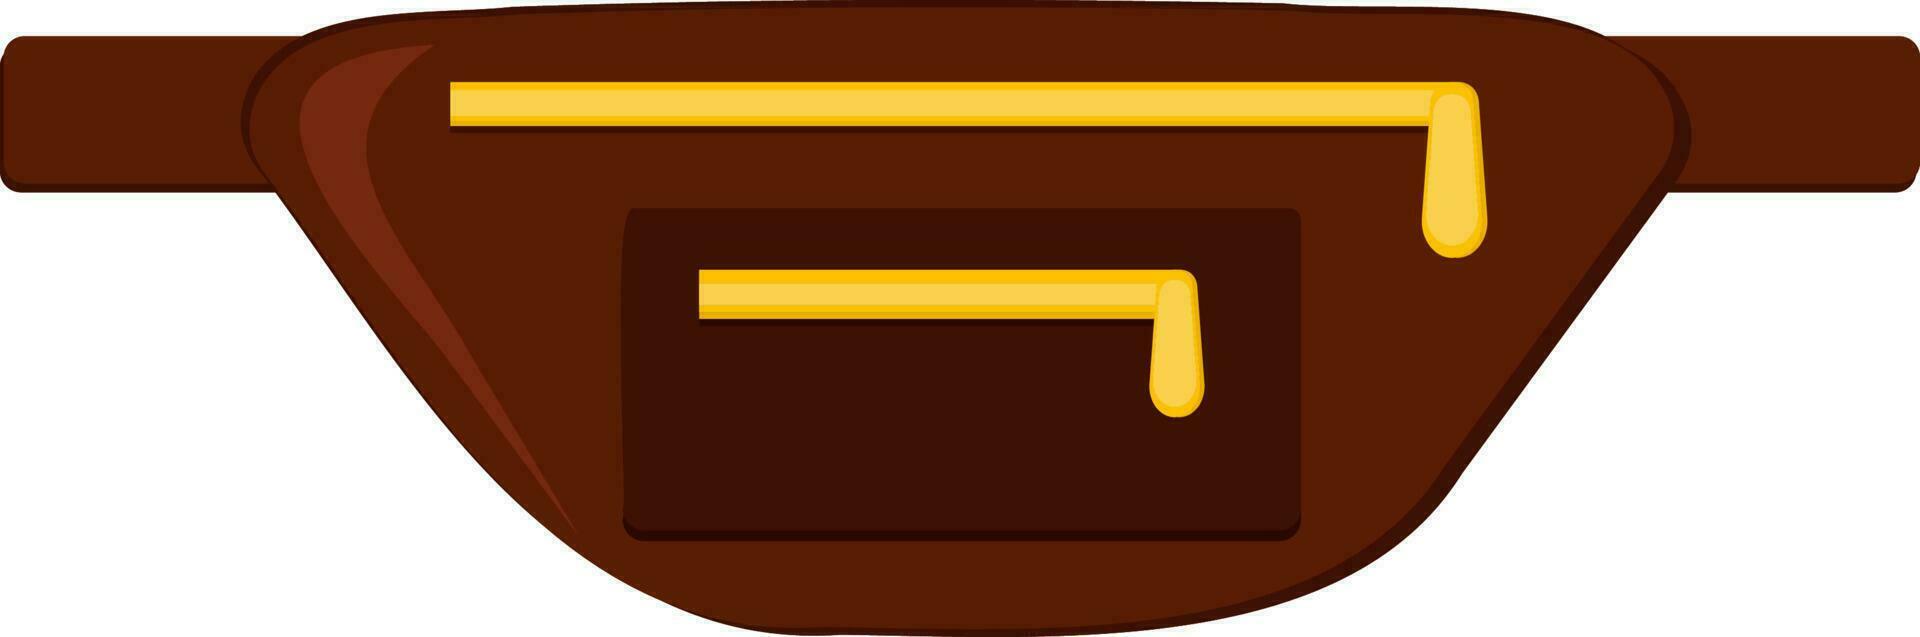 Waist Or Chest Bag Flat Icon In Brown And Yellow Color. vector